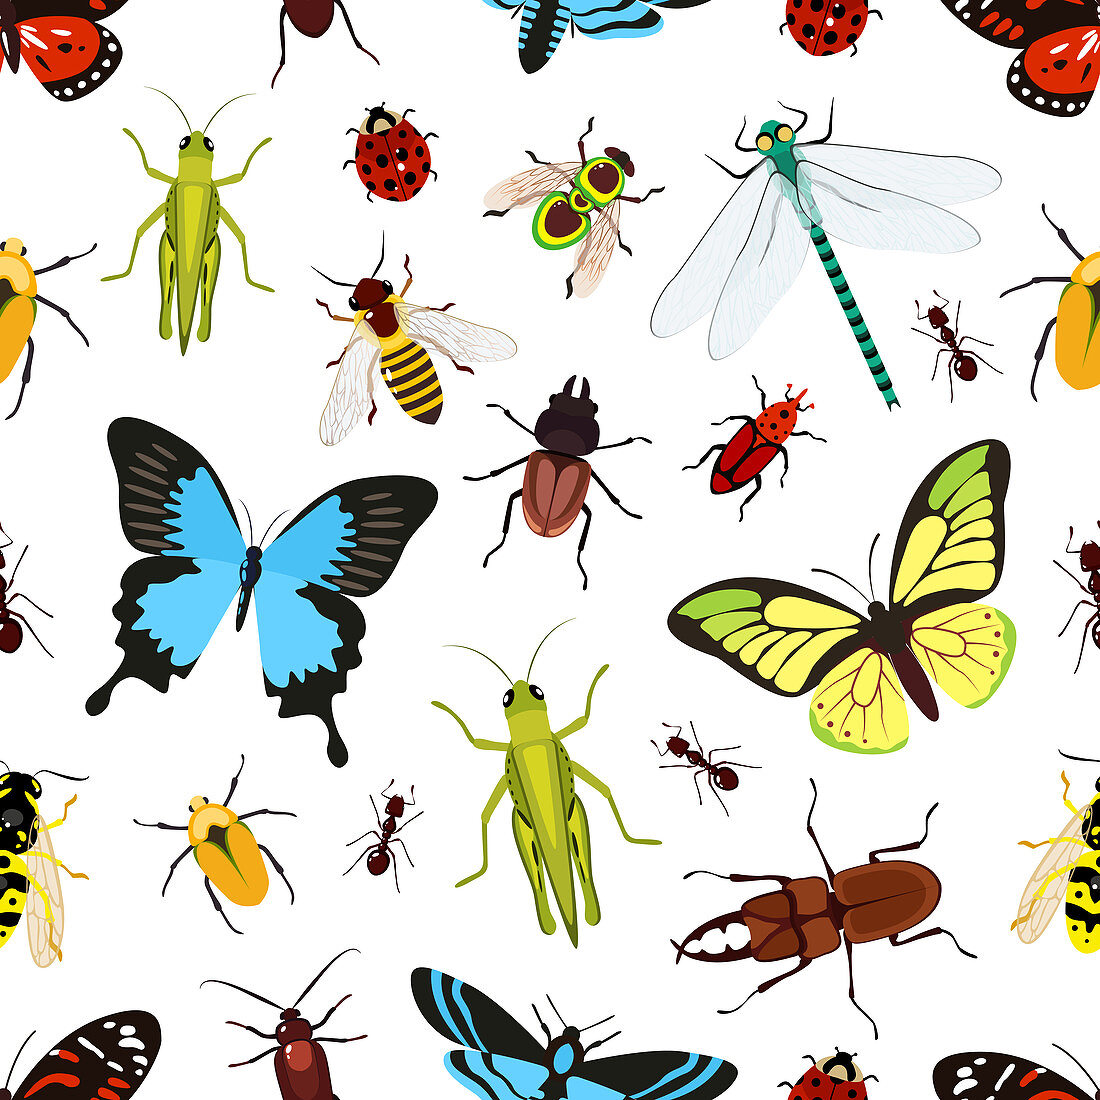 Insects, illustration